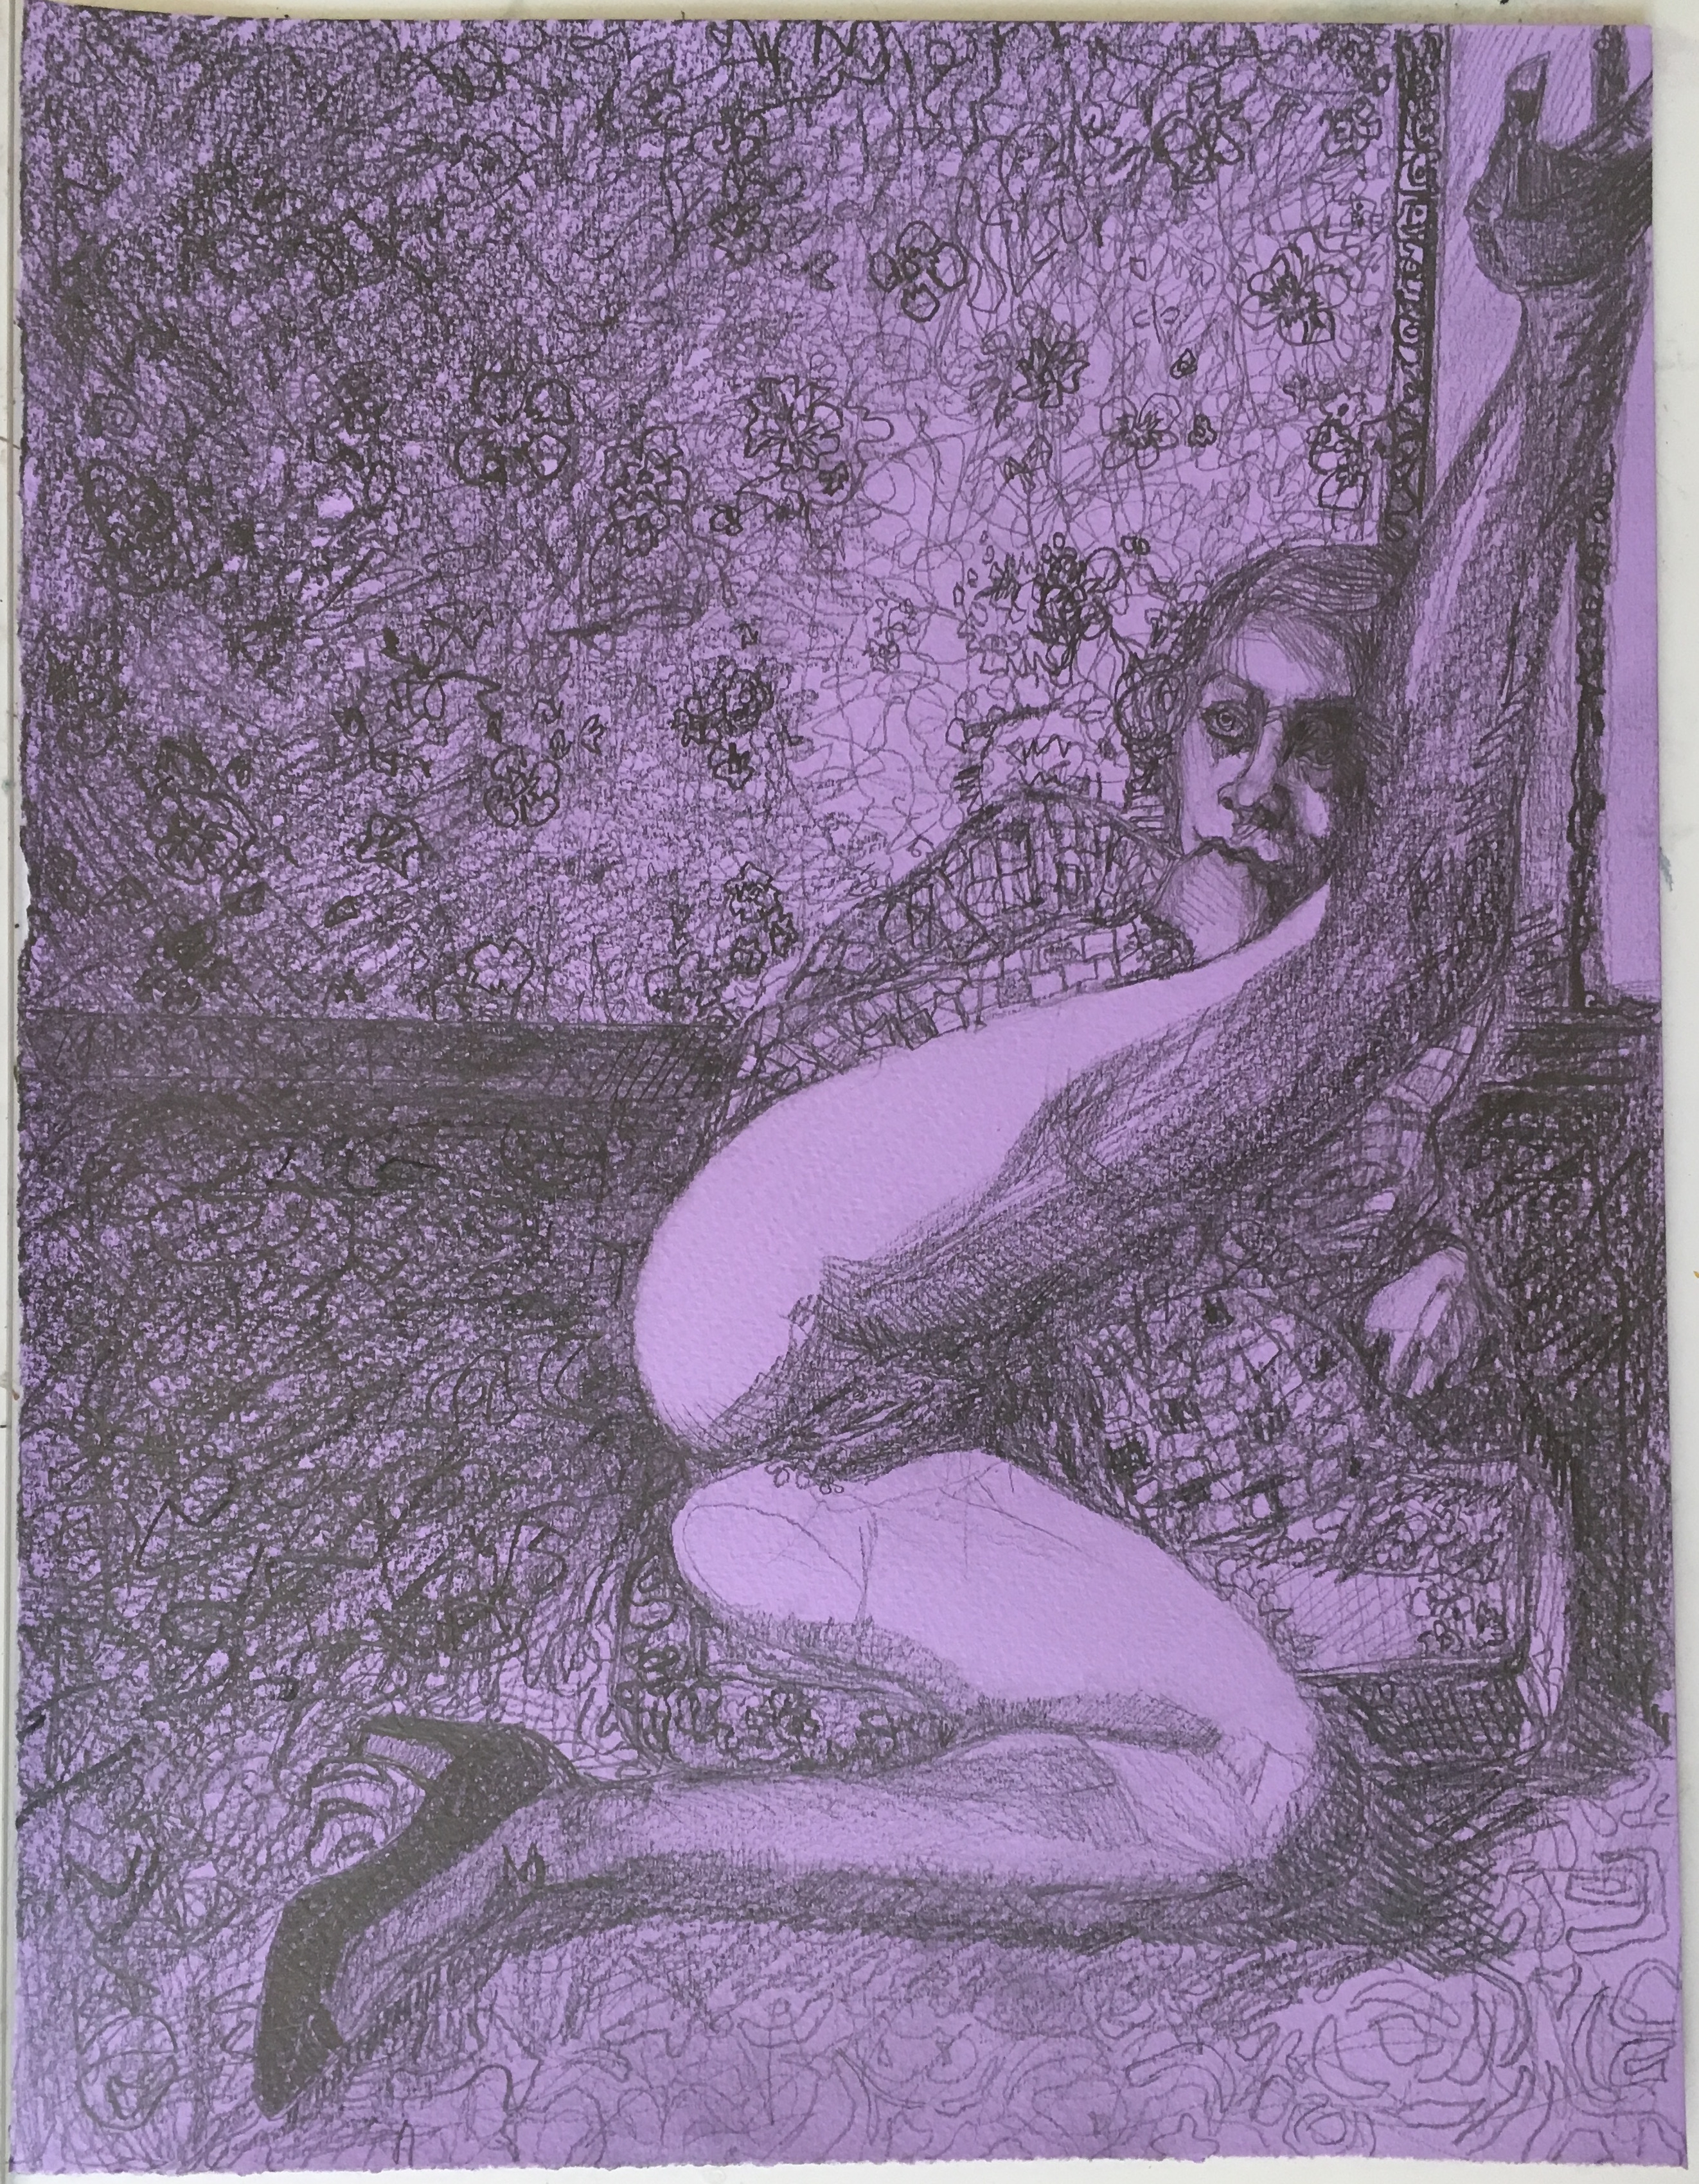 Untitled, graphite on lilac tinted paper, 12.5 x 10 inches, 2017